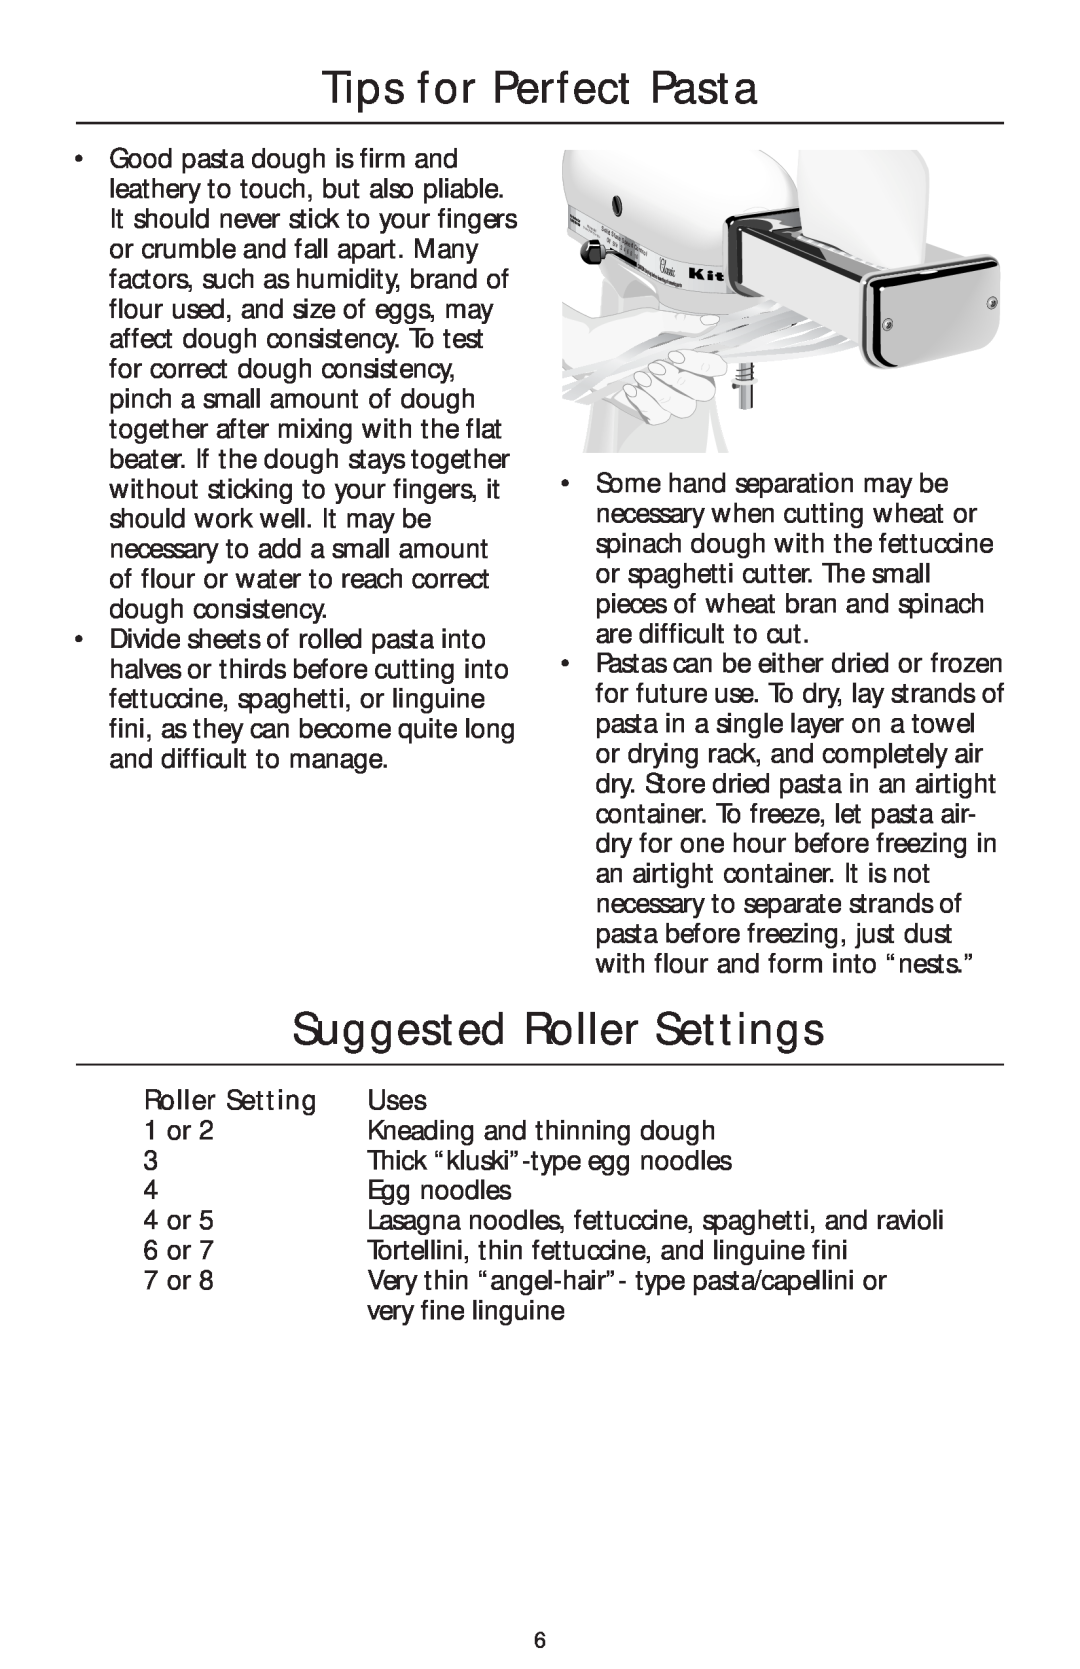 KitchenAid KPRA manual Tips for Perfect Pasta, Suggested Roller Settings, Uses 